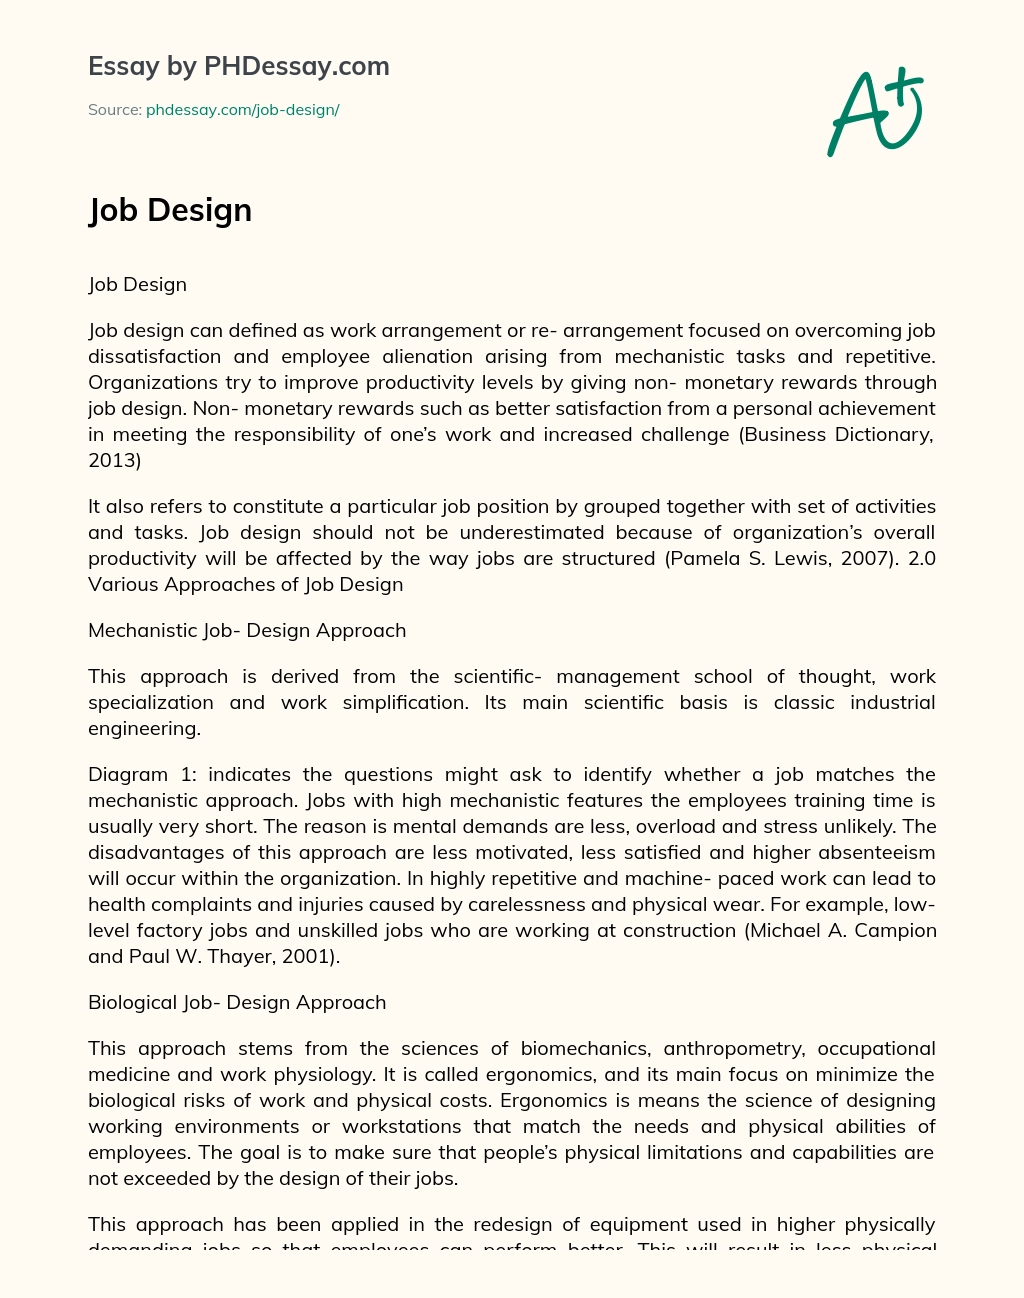 Exploring Job Design: Overcoming Dissatisfaction and Boosting Productivity essay